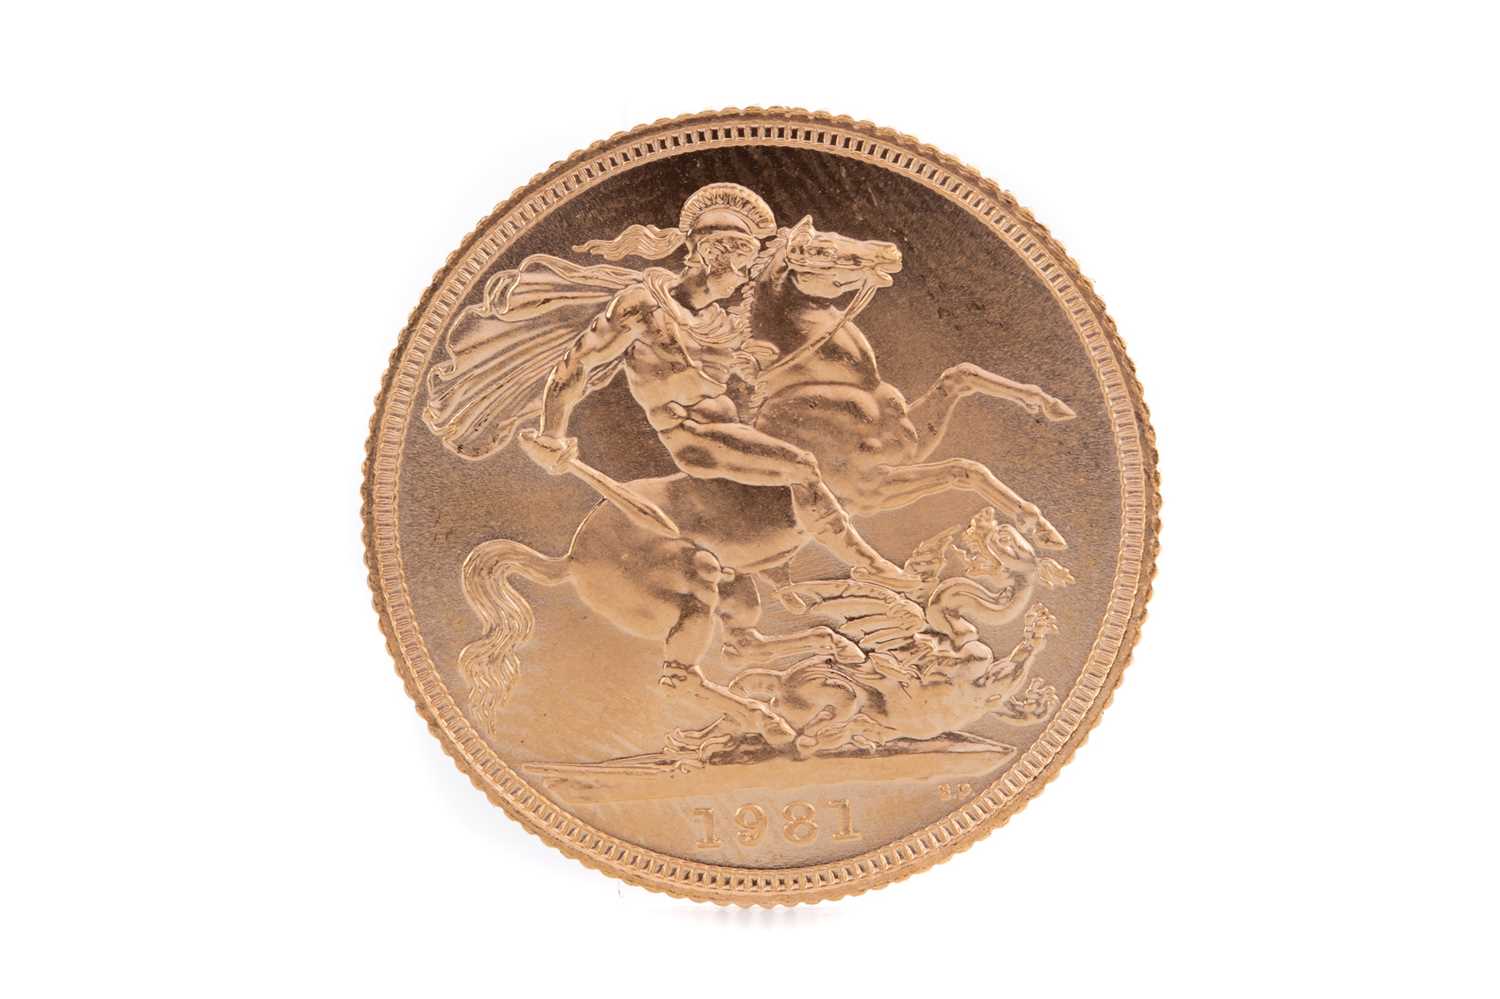 Lot 86 - AN ELIZABETH II GOLD SOVEREIGN DATED 1981